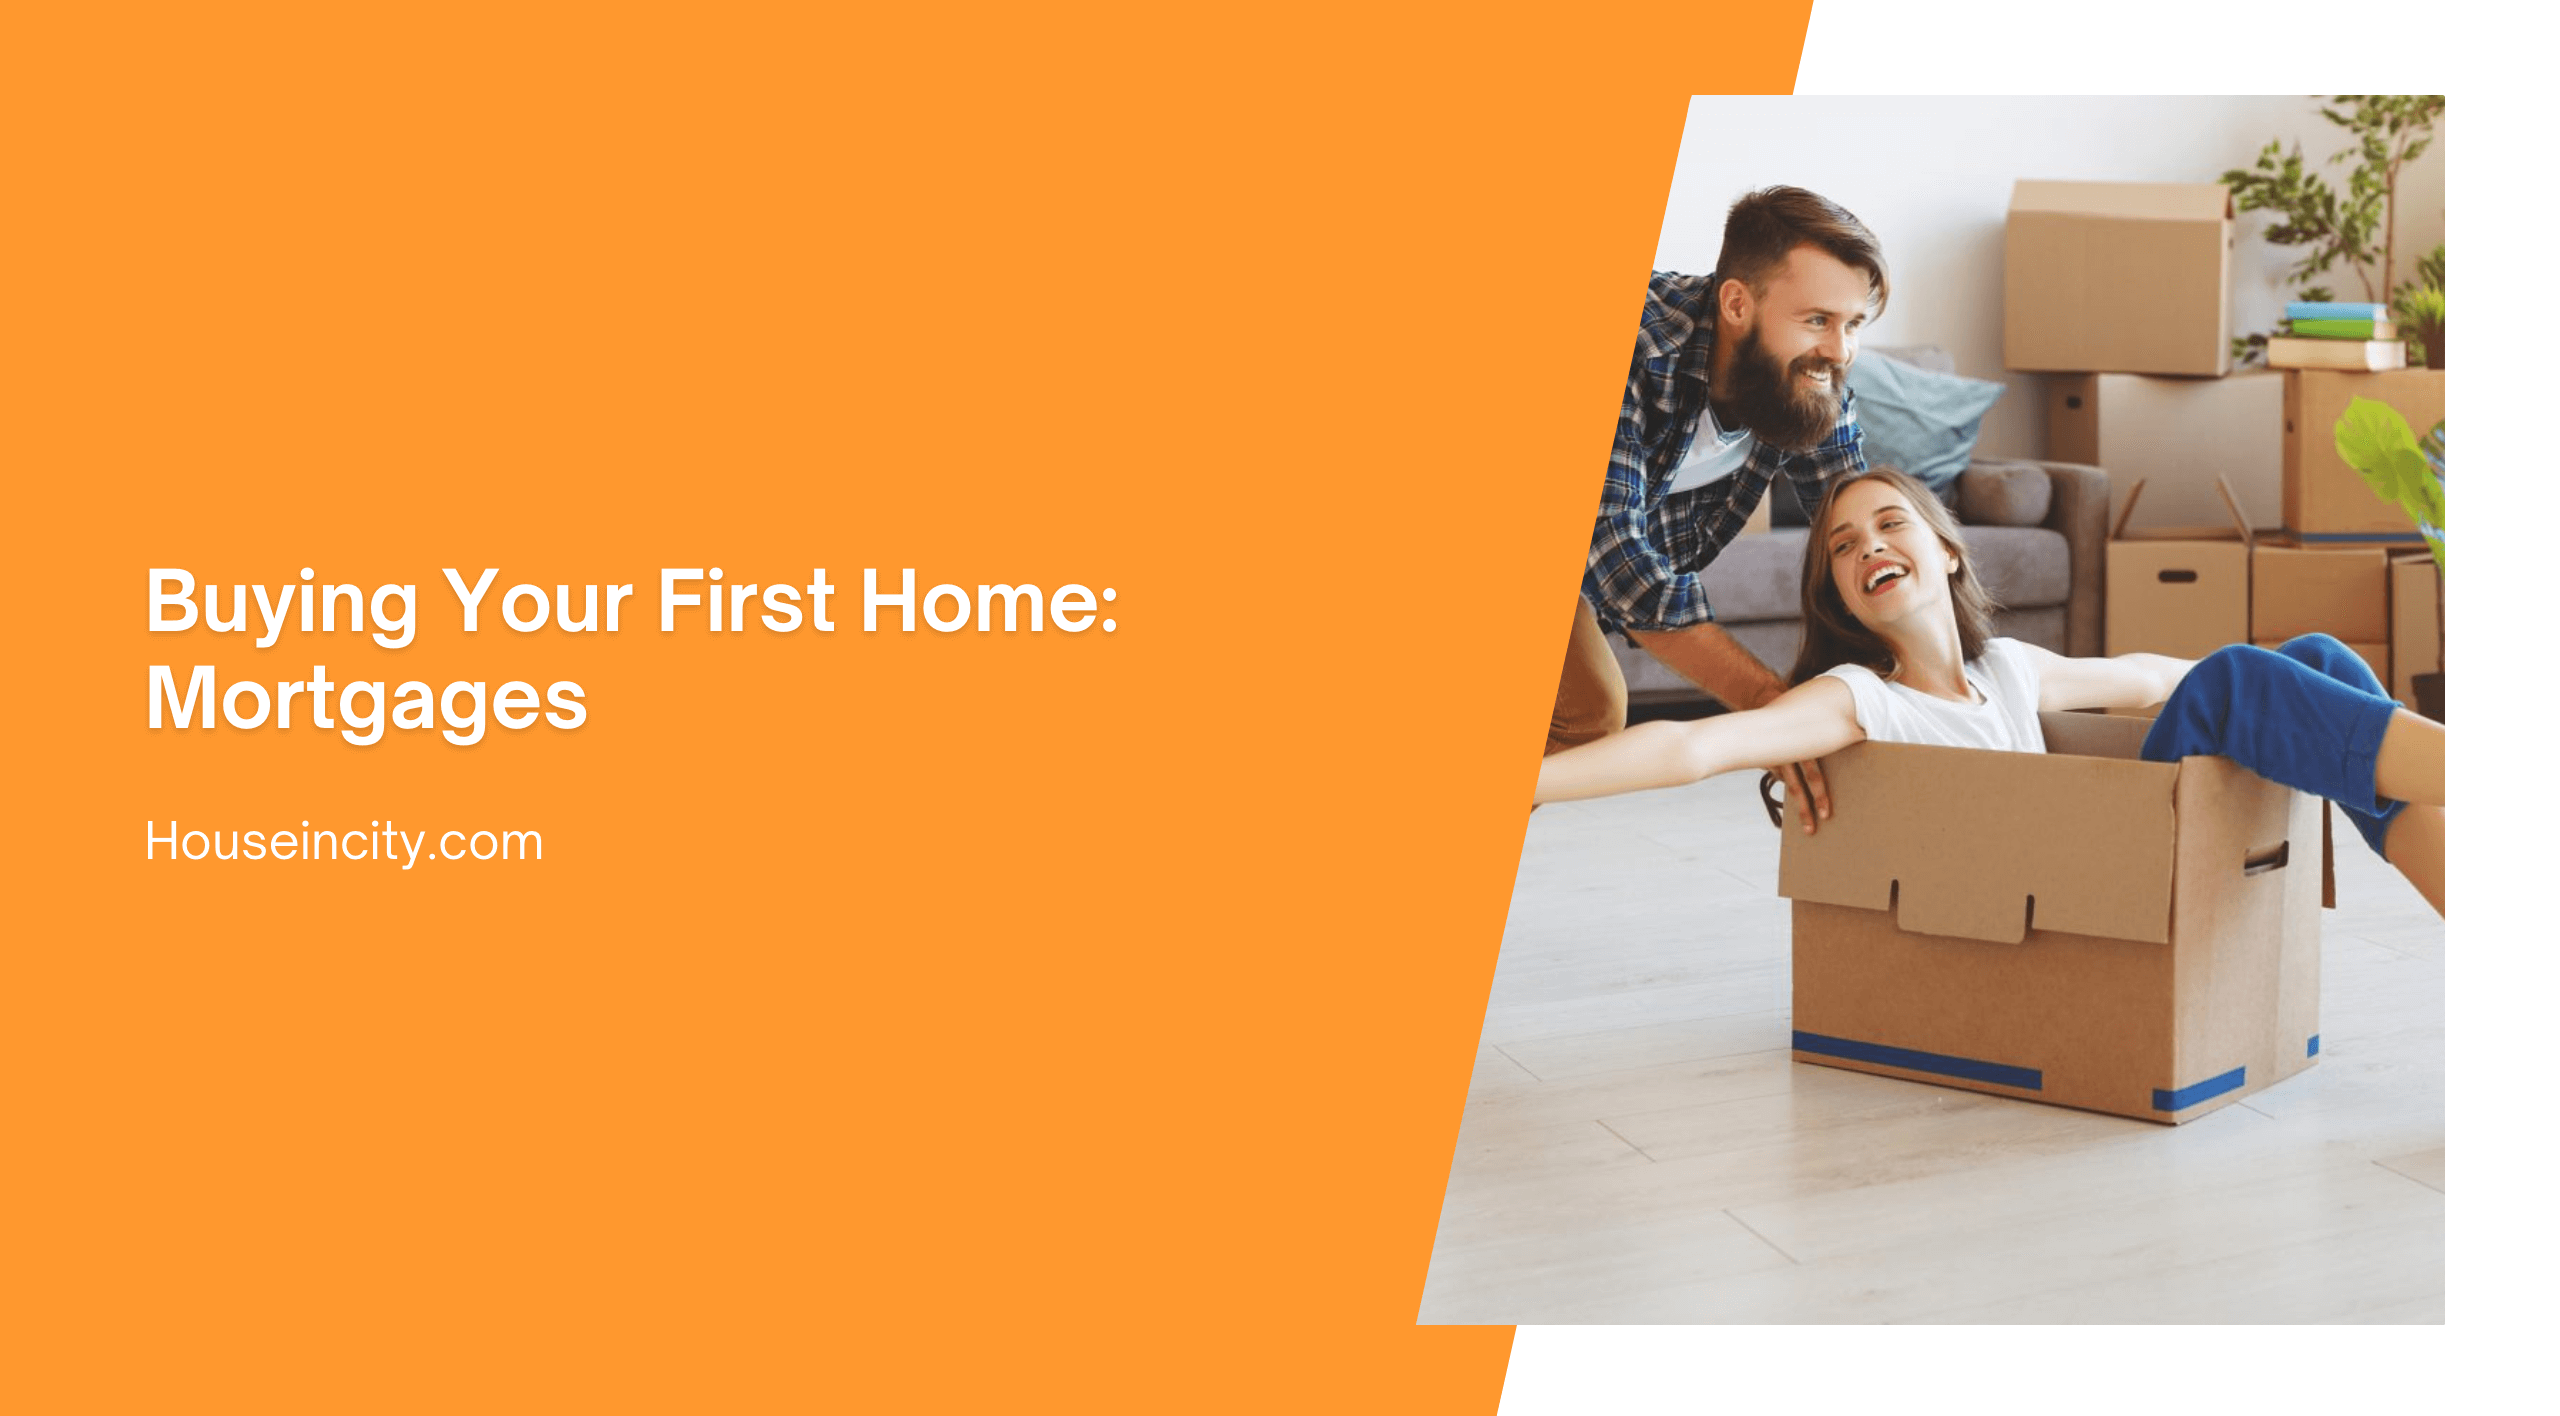 Buying Your First Home: Mortgages